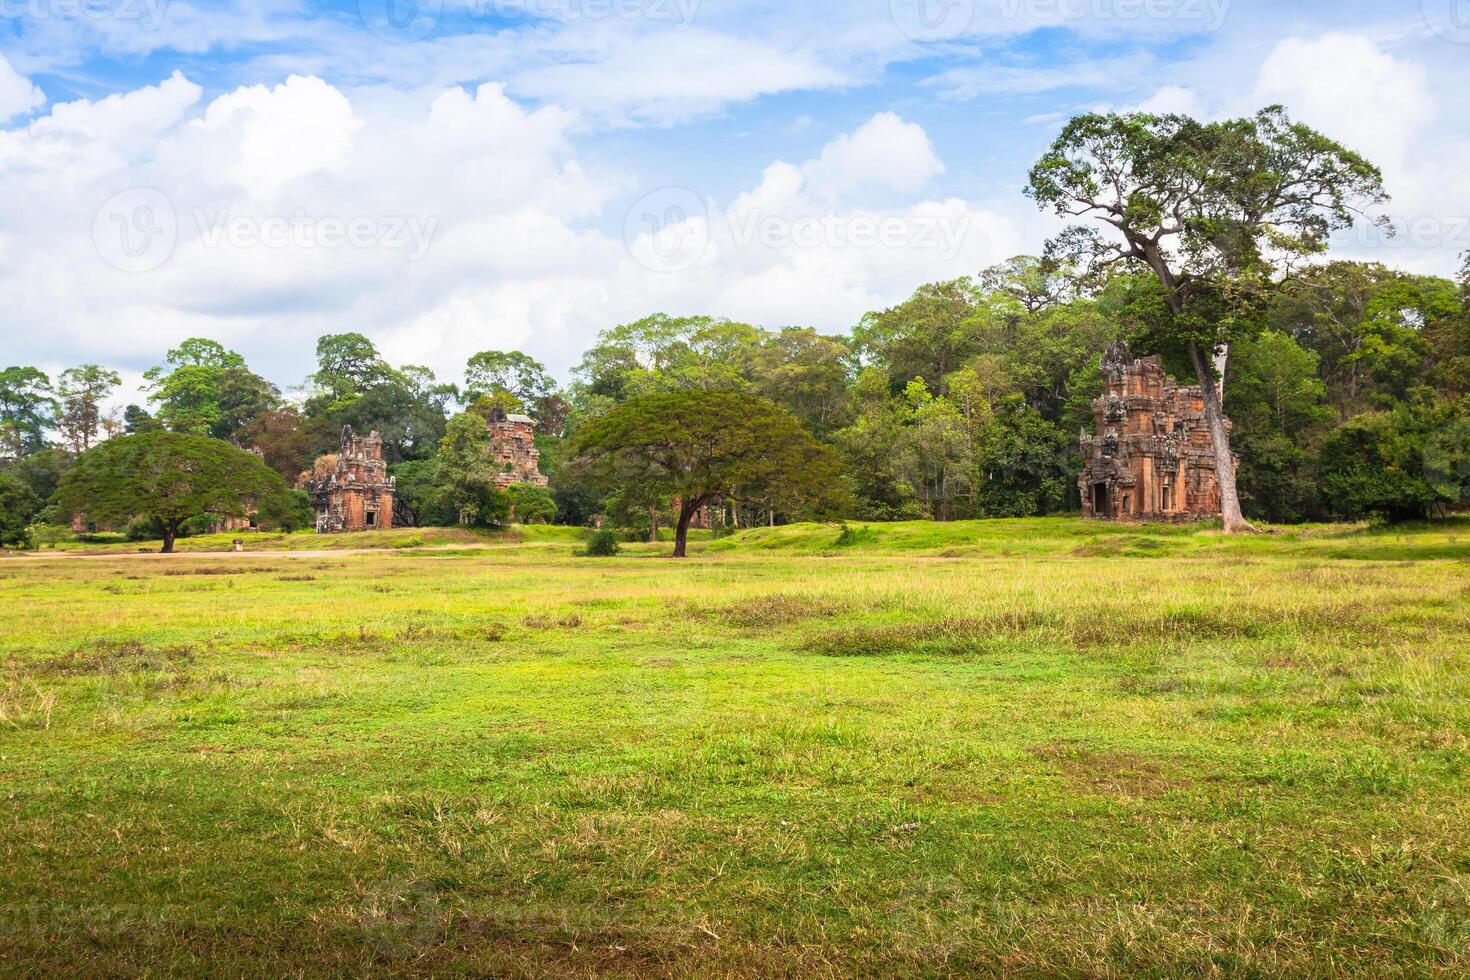 Angkor Thom gardens in front the Elephants Terrace within the Angkor Temples, Cambodia photo